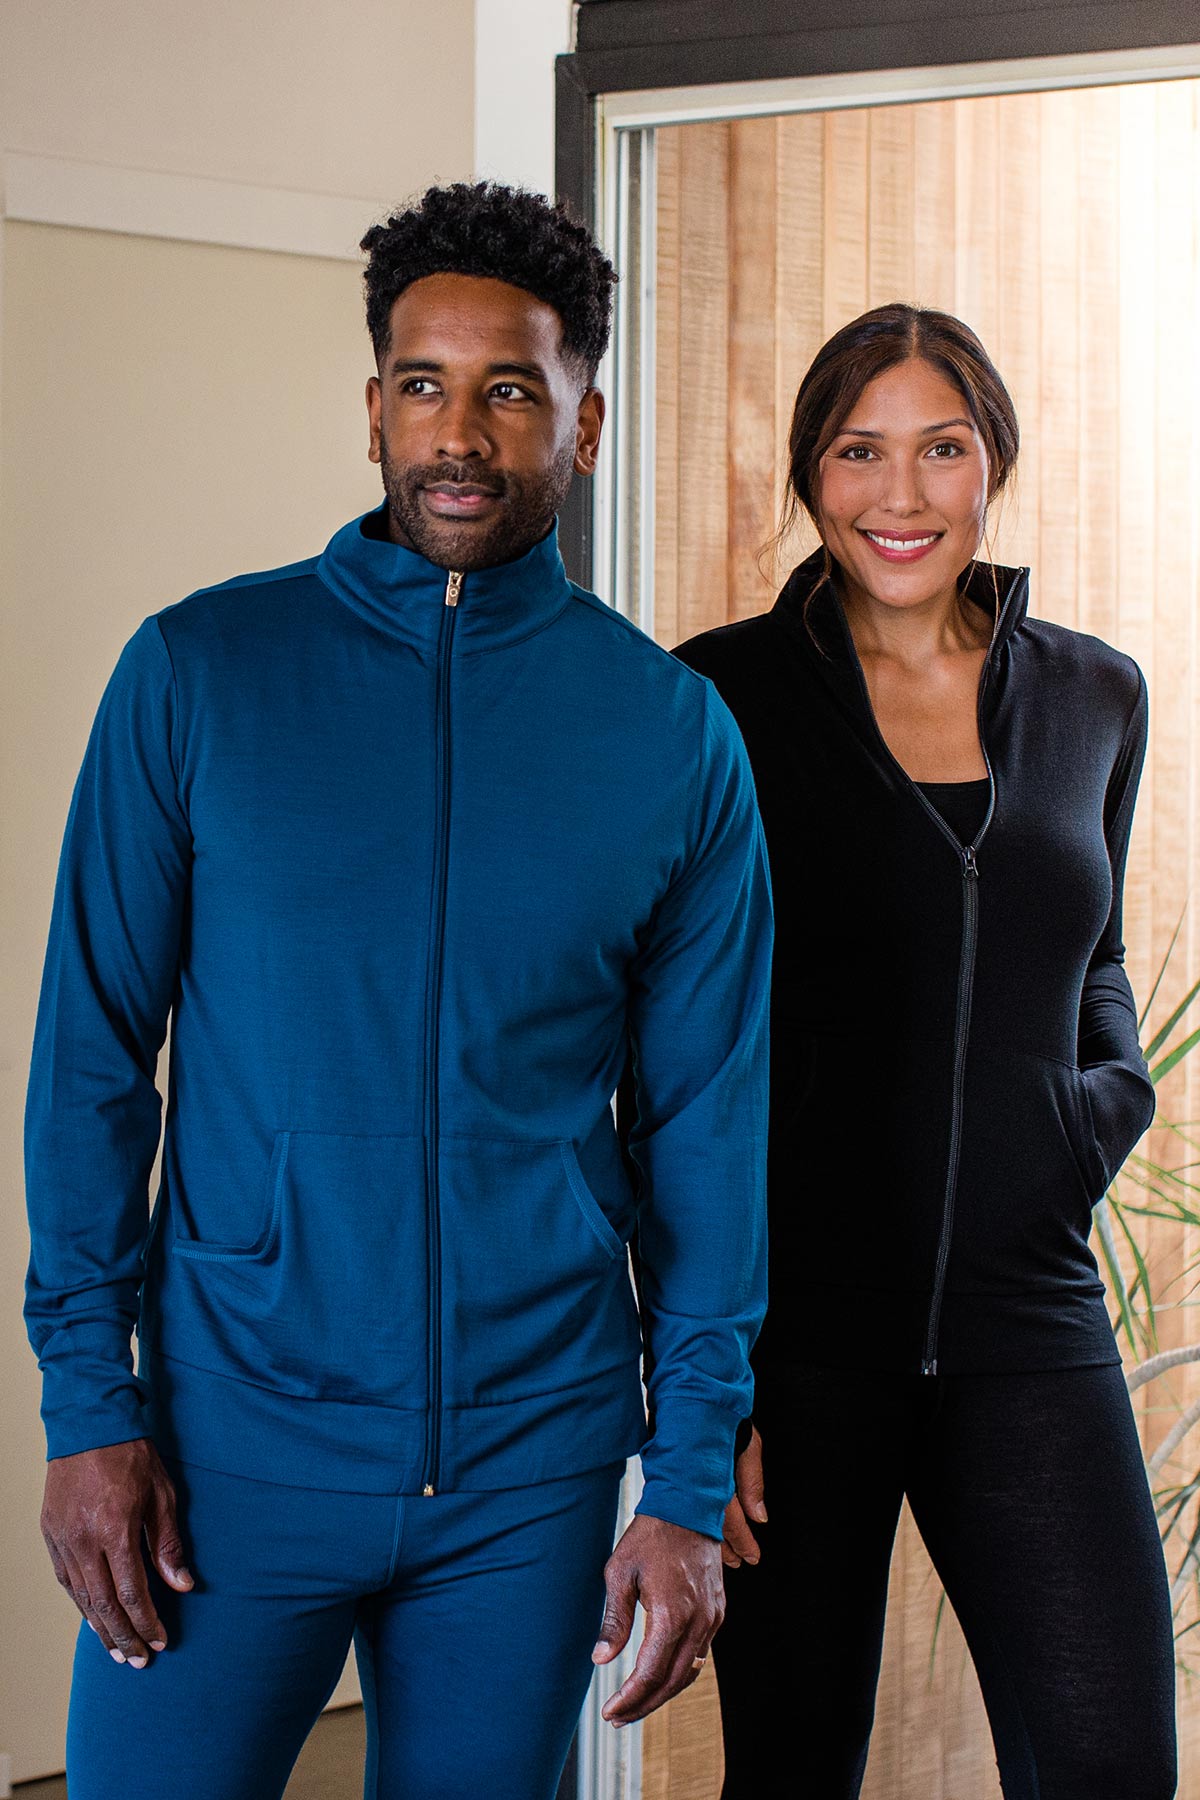 A woman and man standing together, smiling and both wearing Yala Superfine Merino Wool Track Jacket in Black and Lapis